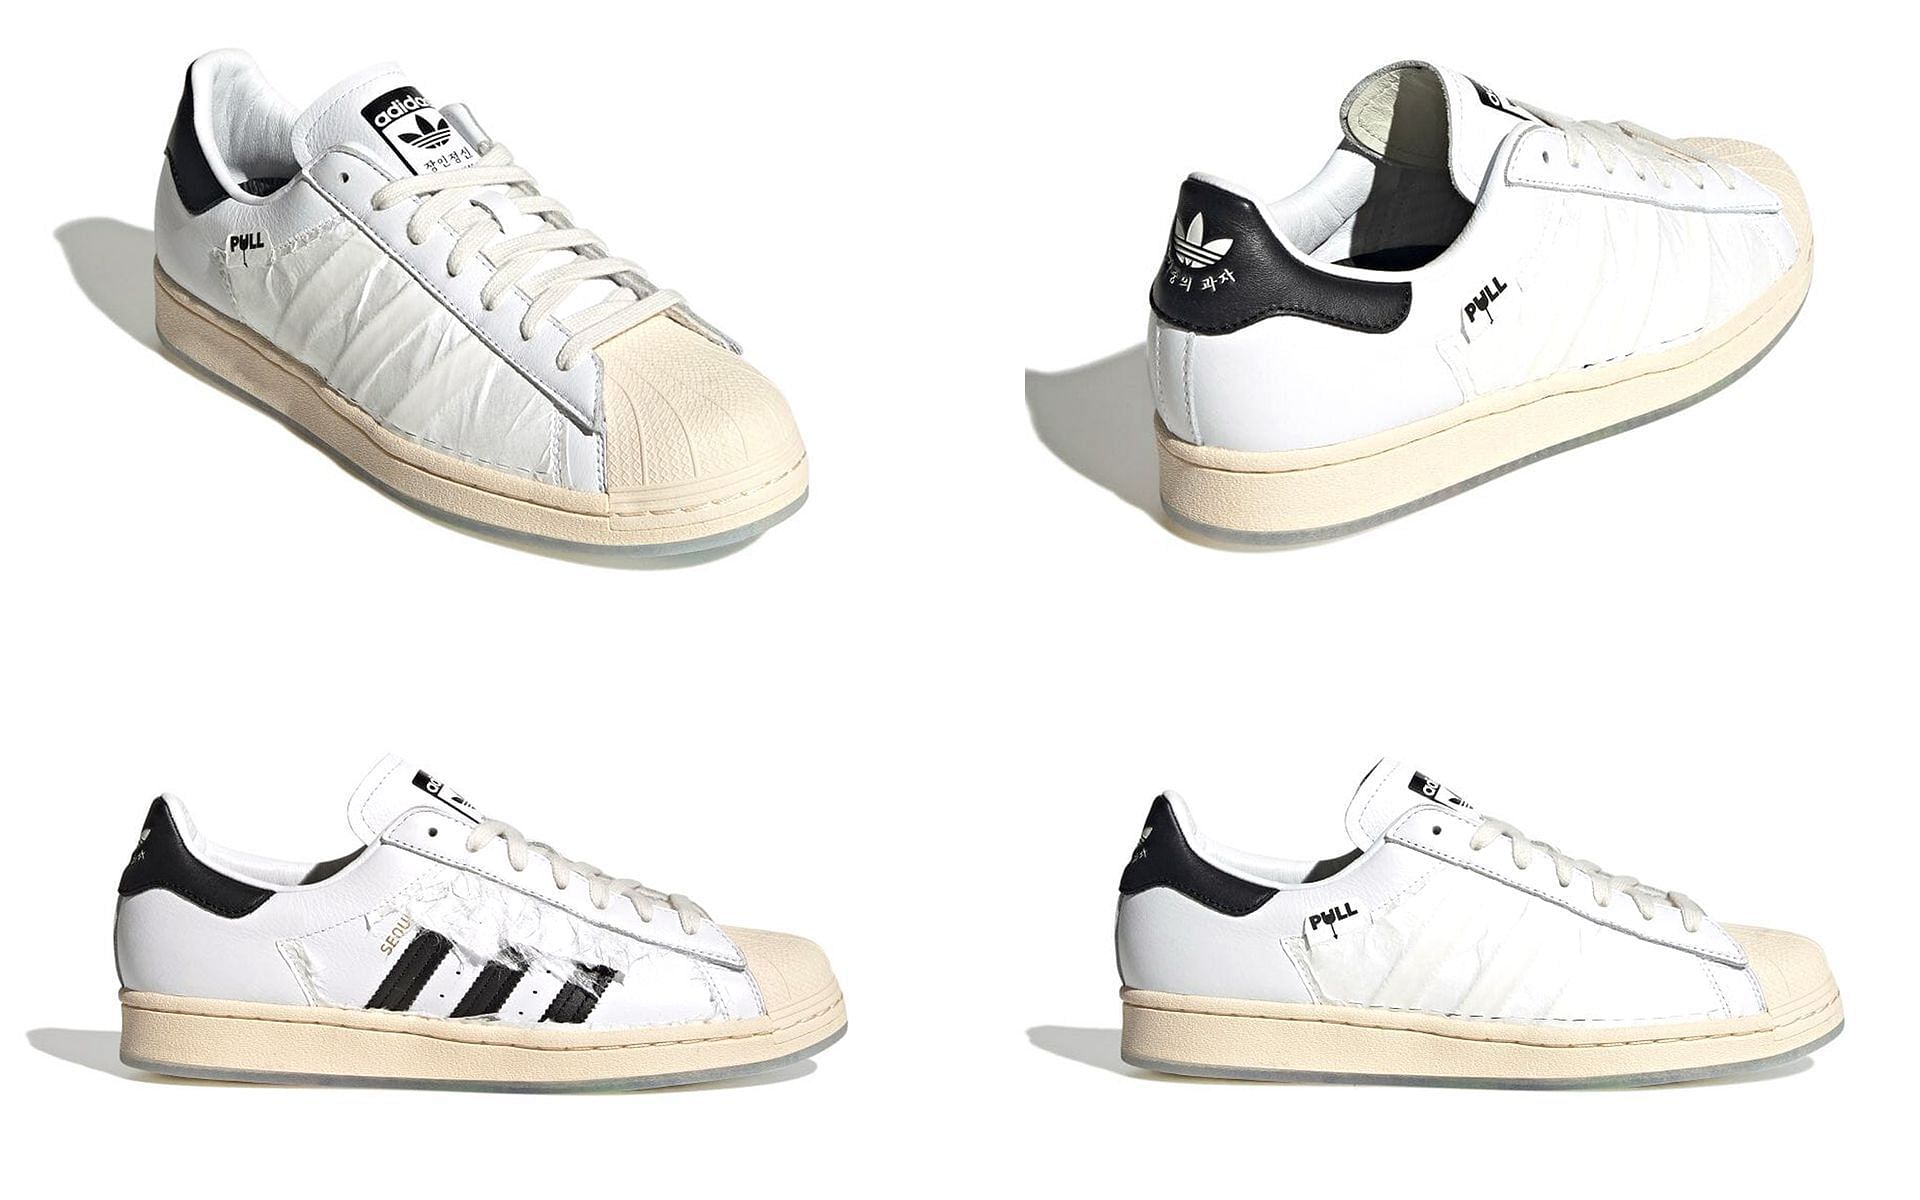 Where to buy Taegeukdang x Adidas Superstar? Price, release date